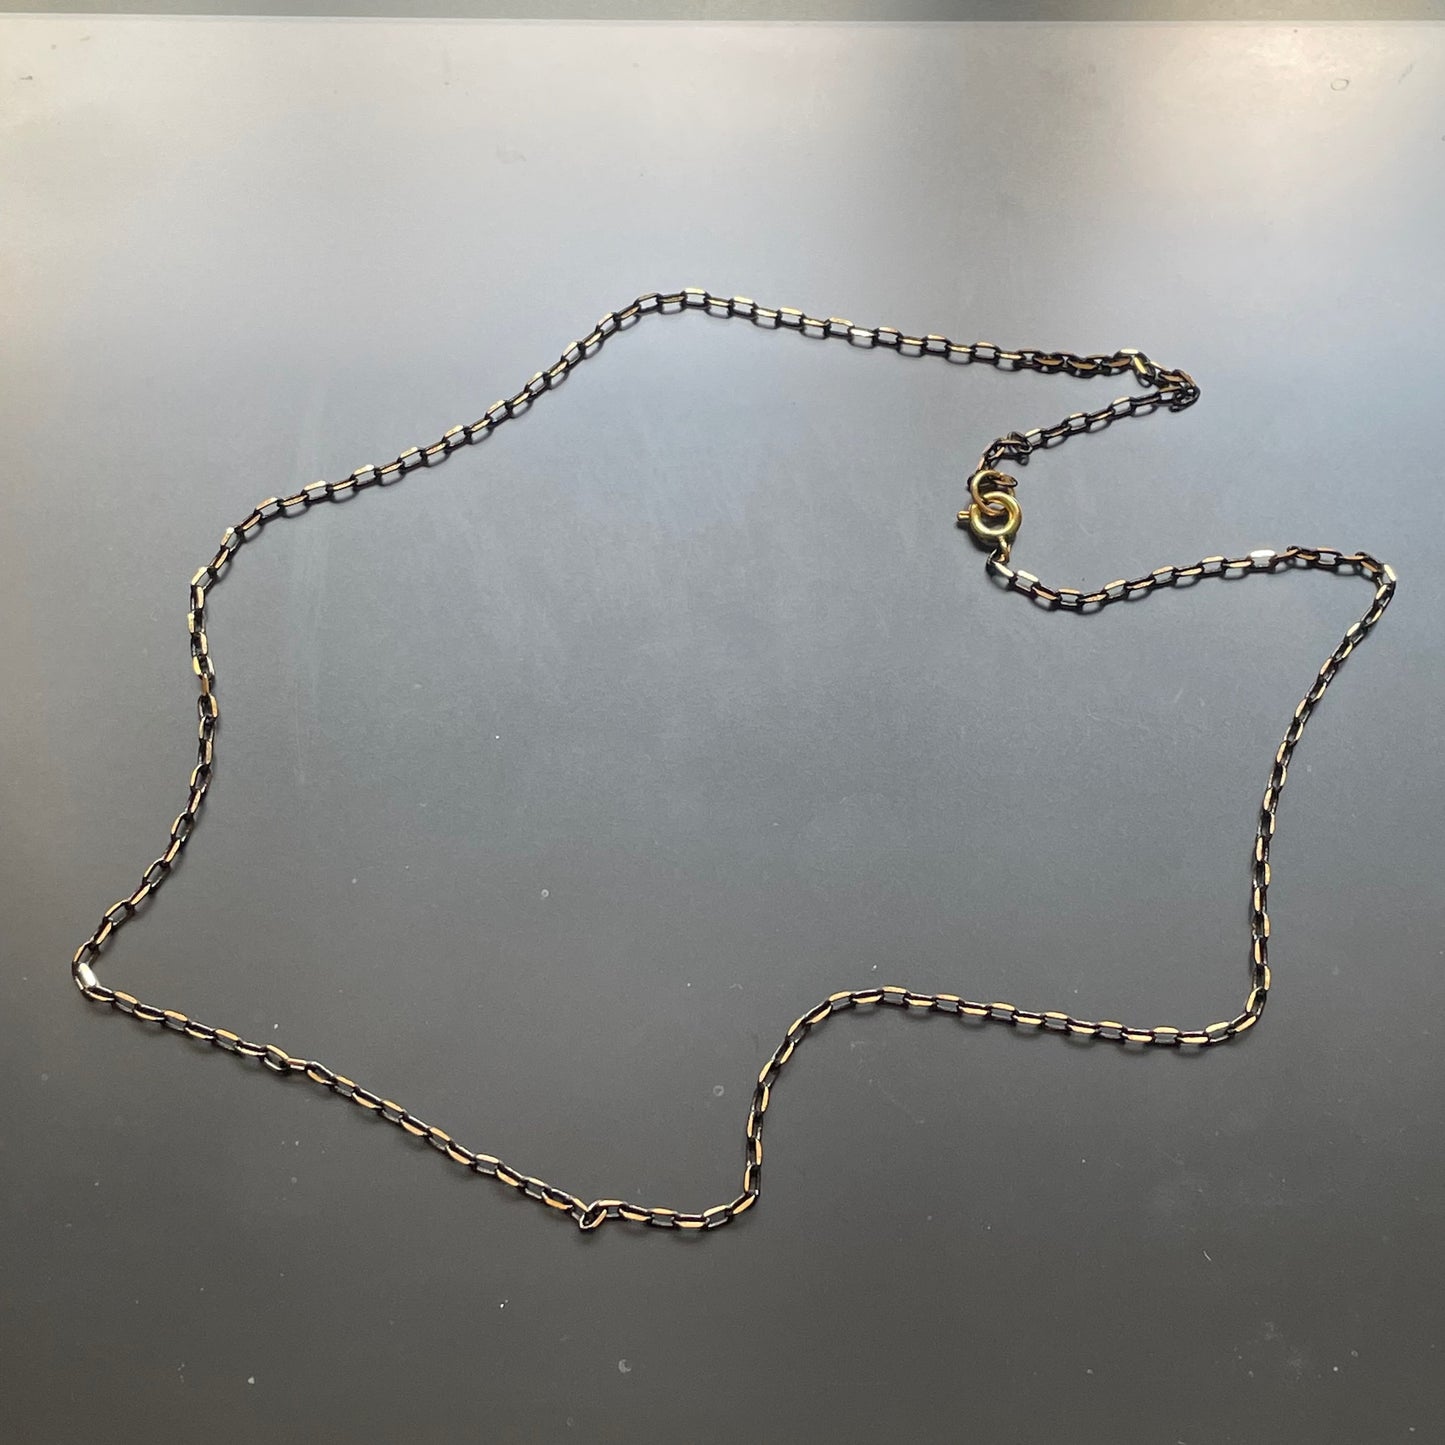 Sparkled Oxidised Brass Chain Necklace